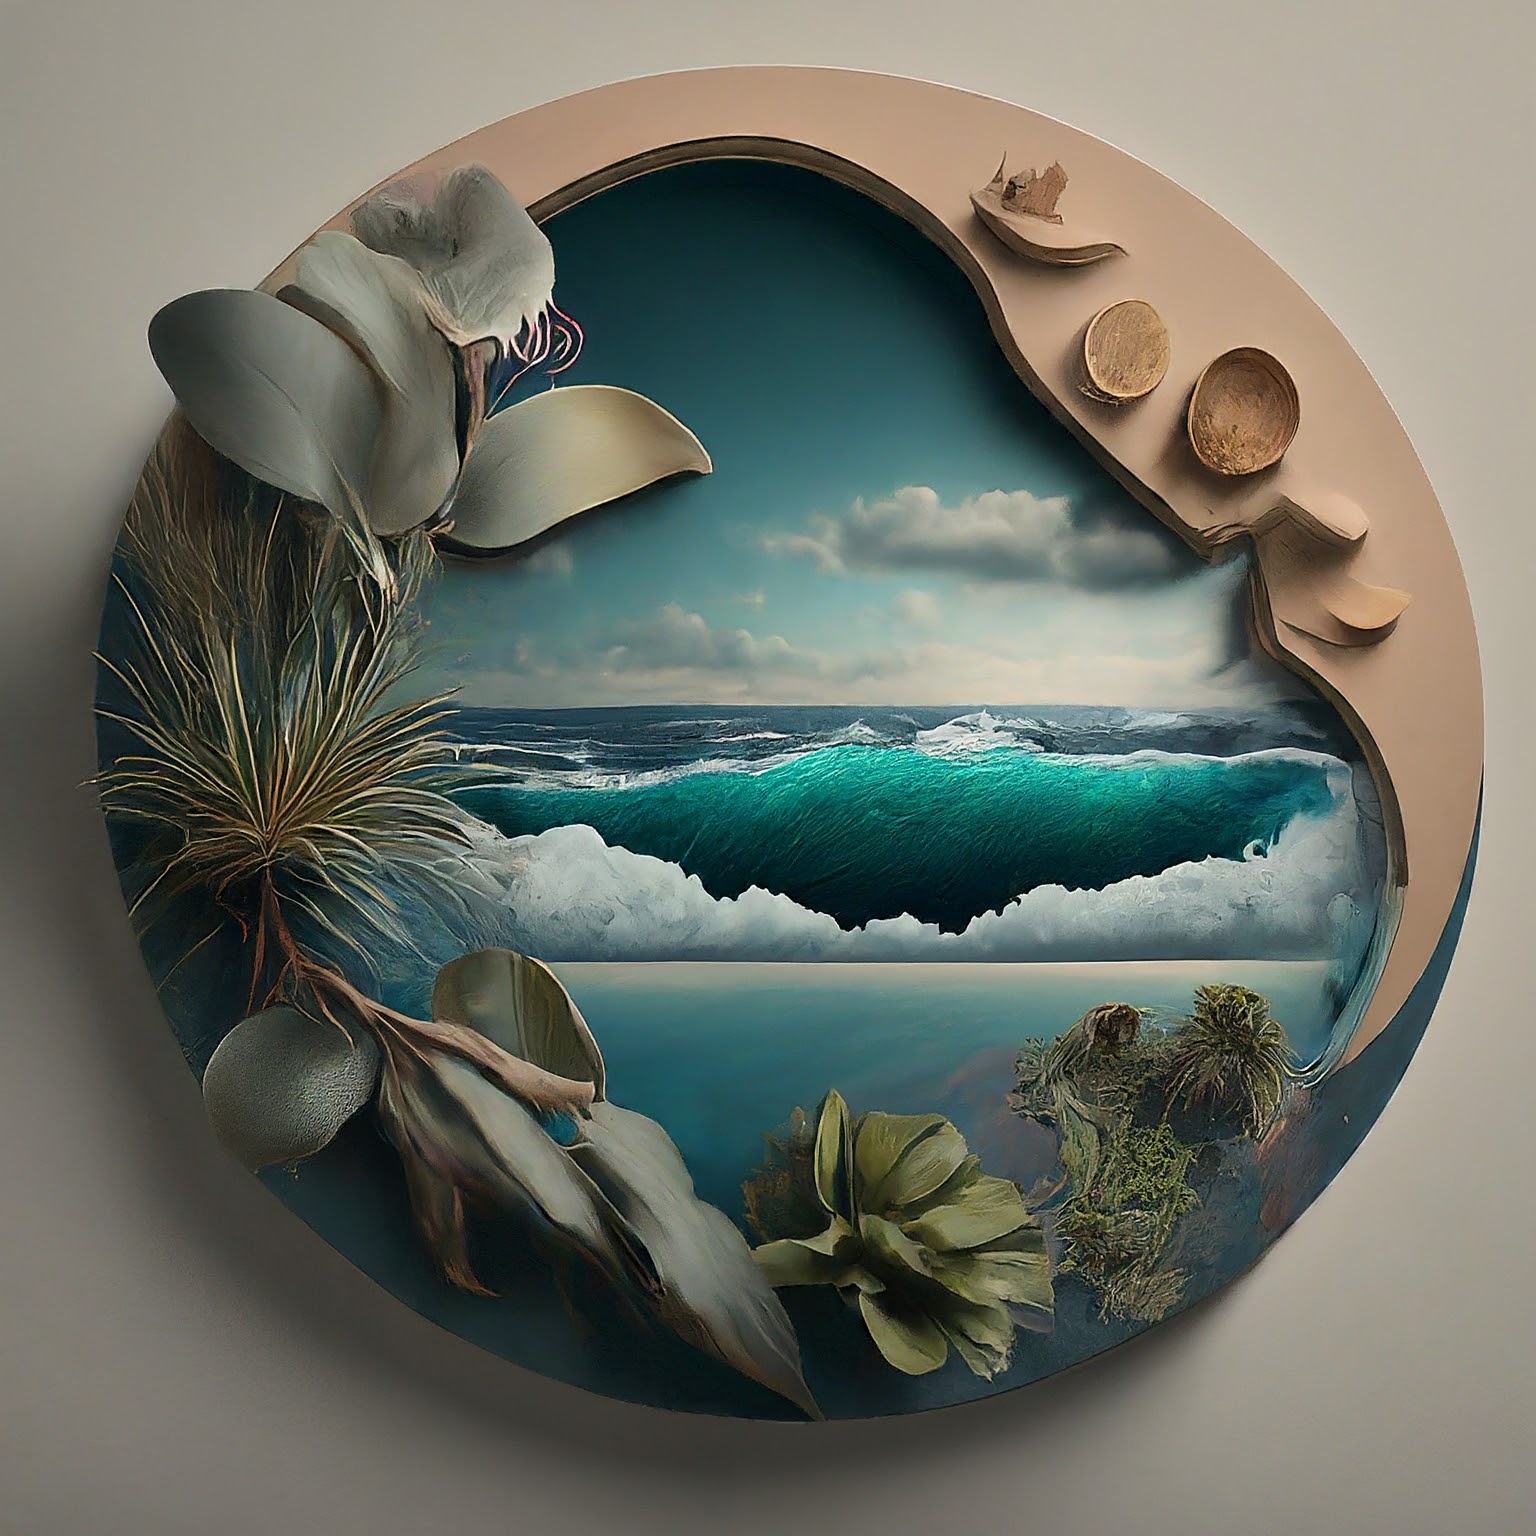 An art piece with shells and plants along the outer edge and waves crashing in the center.